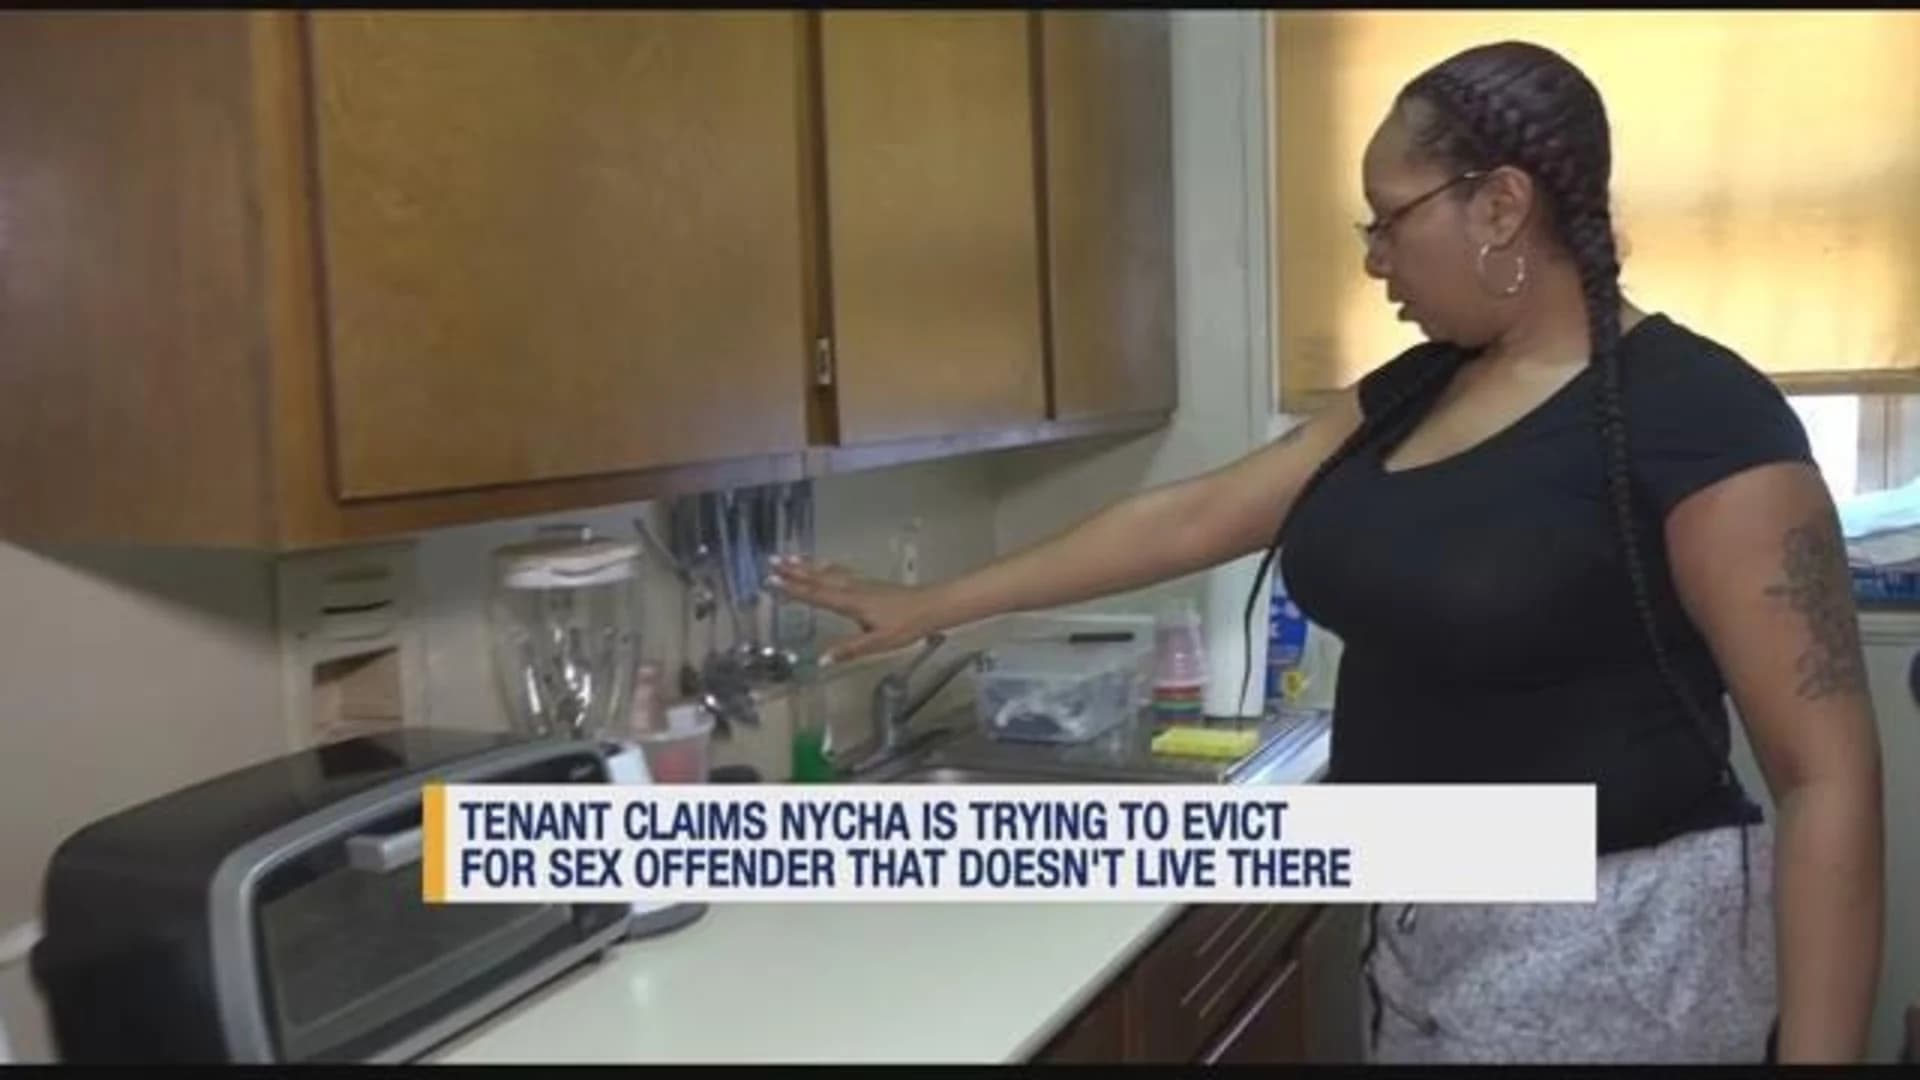 NYCHA tenant facing eviction for housing ‘sex offender’ says she’s never met him